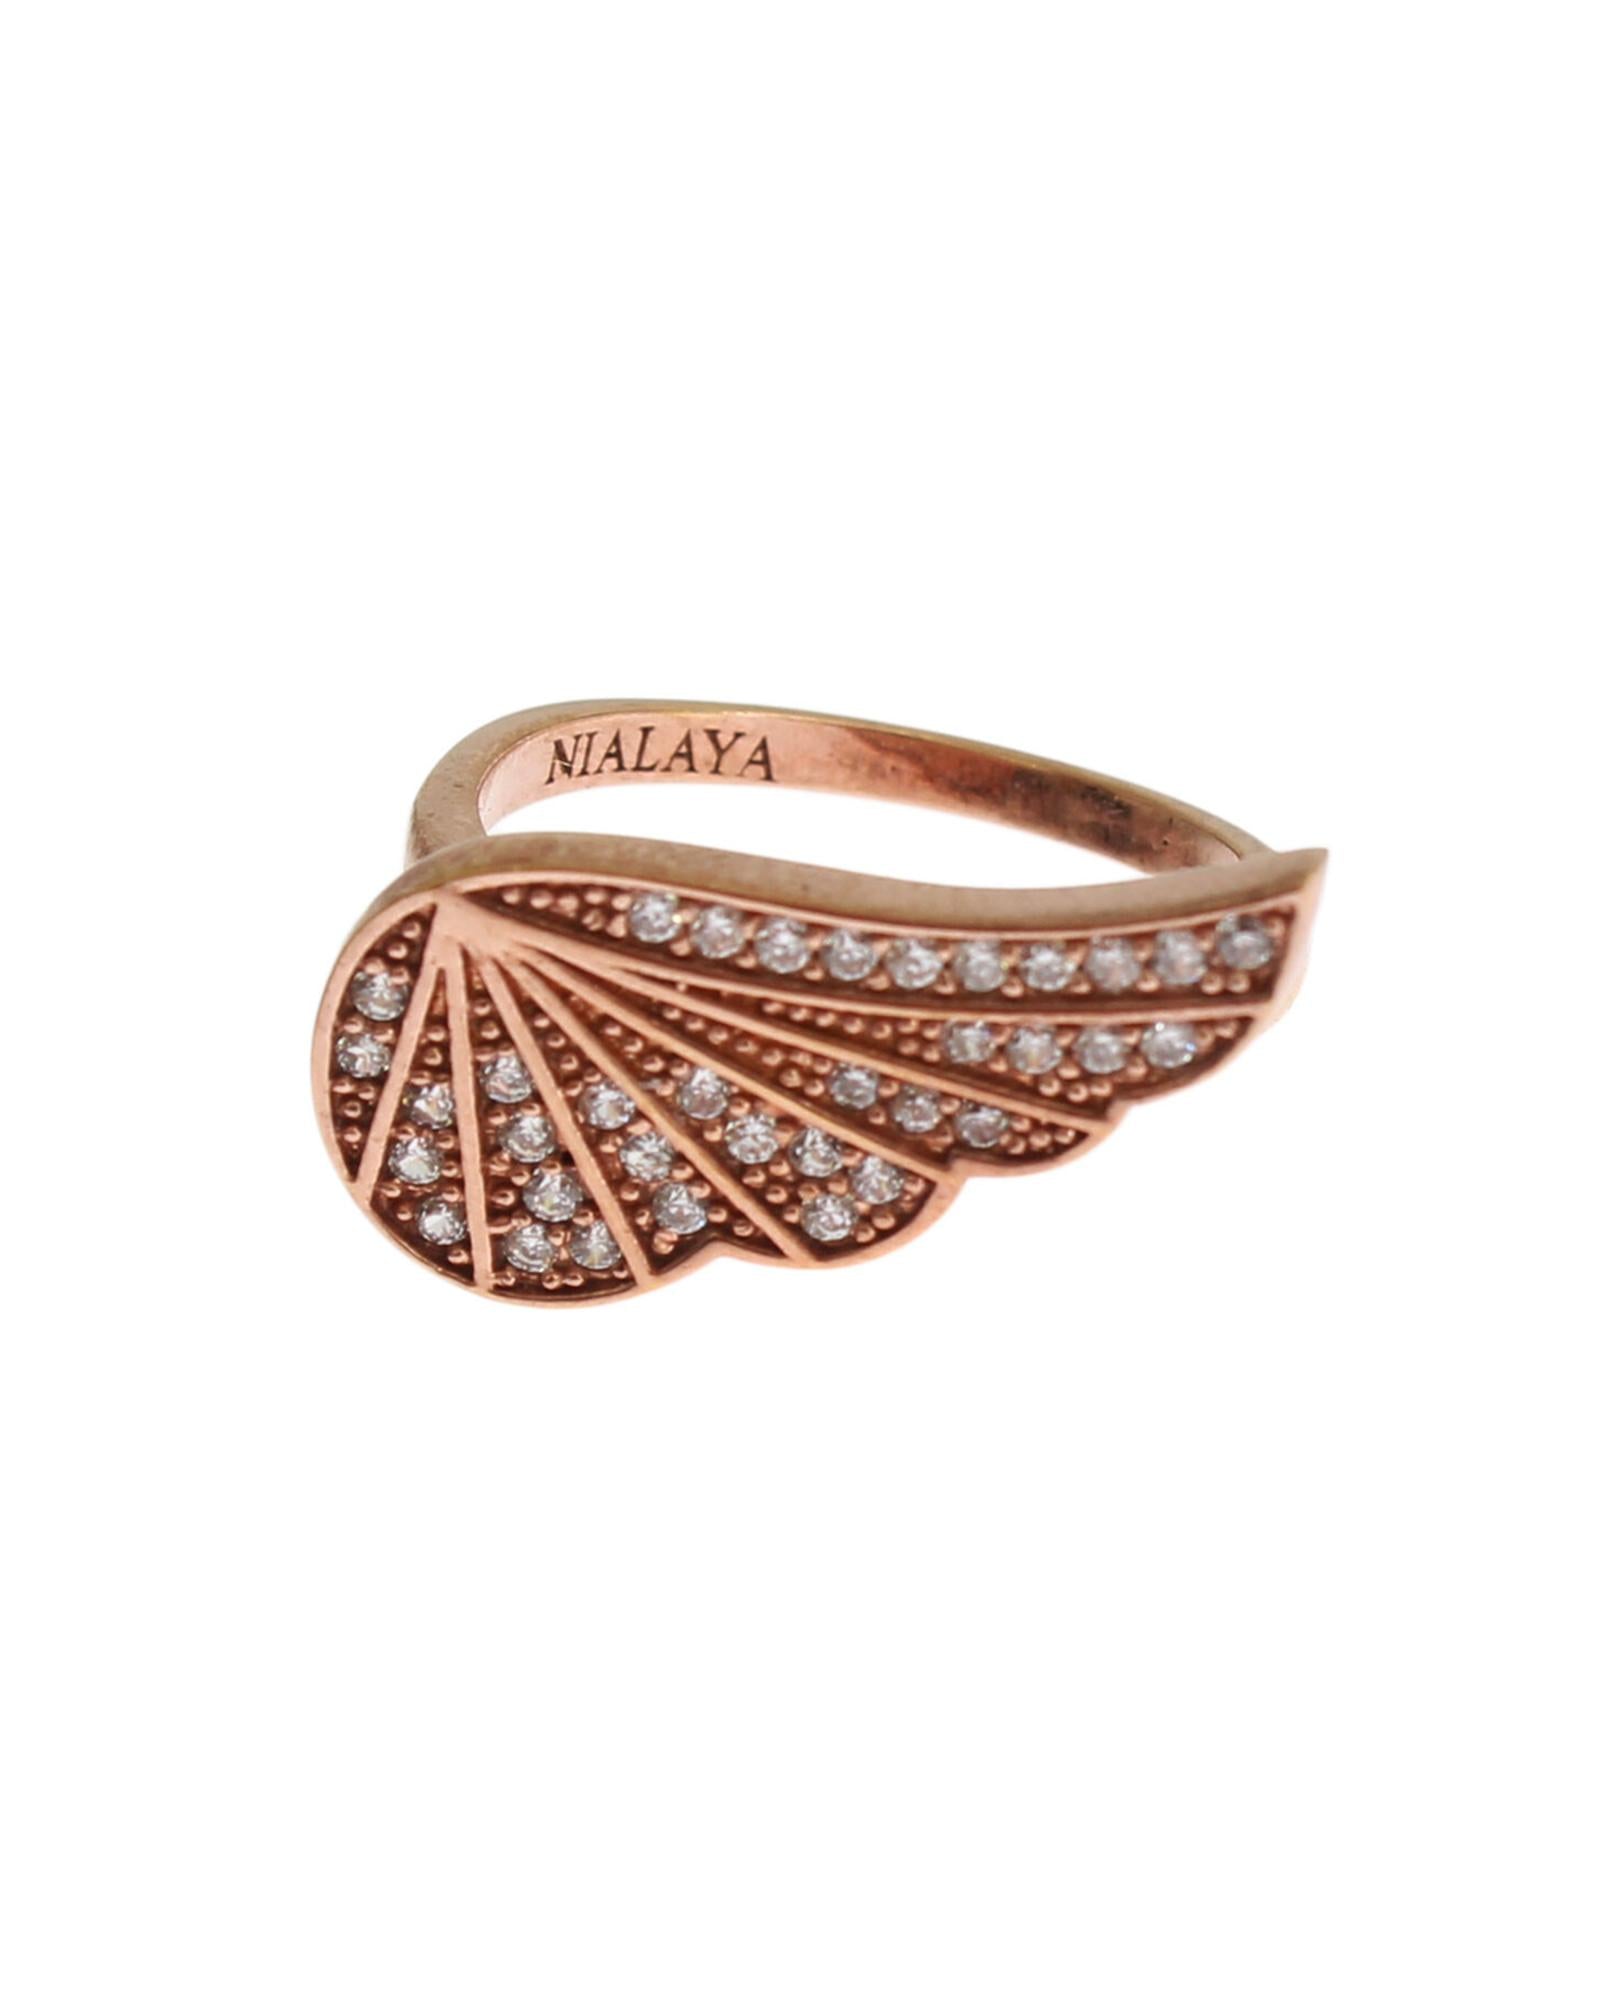 Authentic NIALAYA Ring with Pink Gold Plating and Clear CZ Crystals 52 EU Women